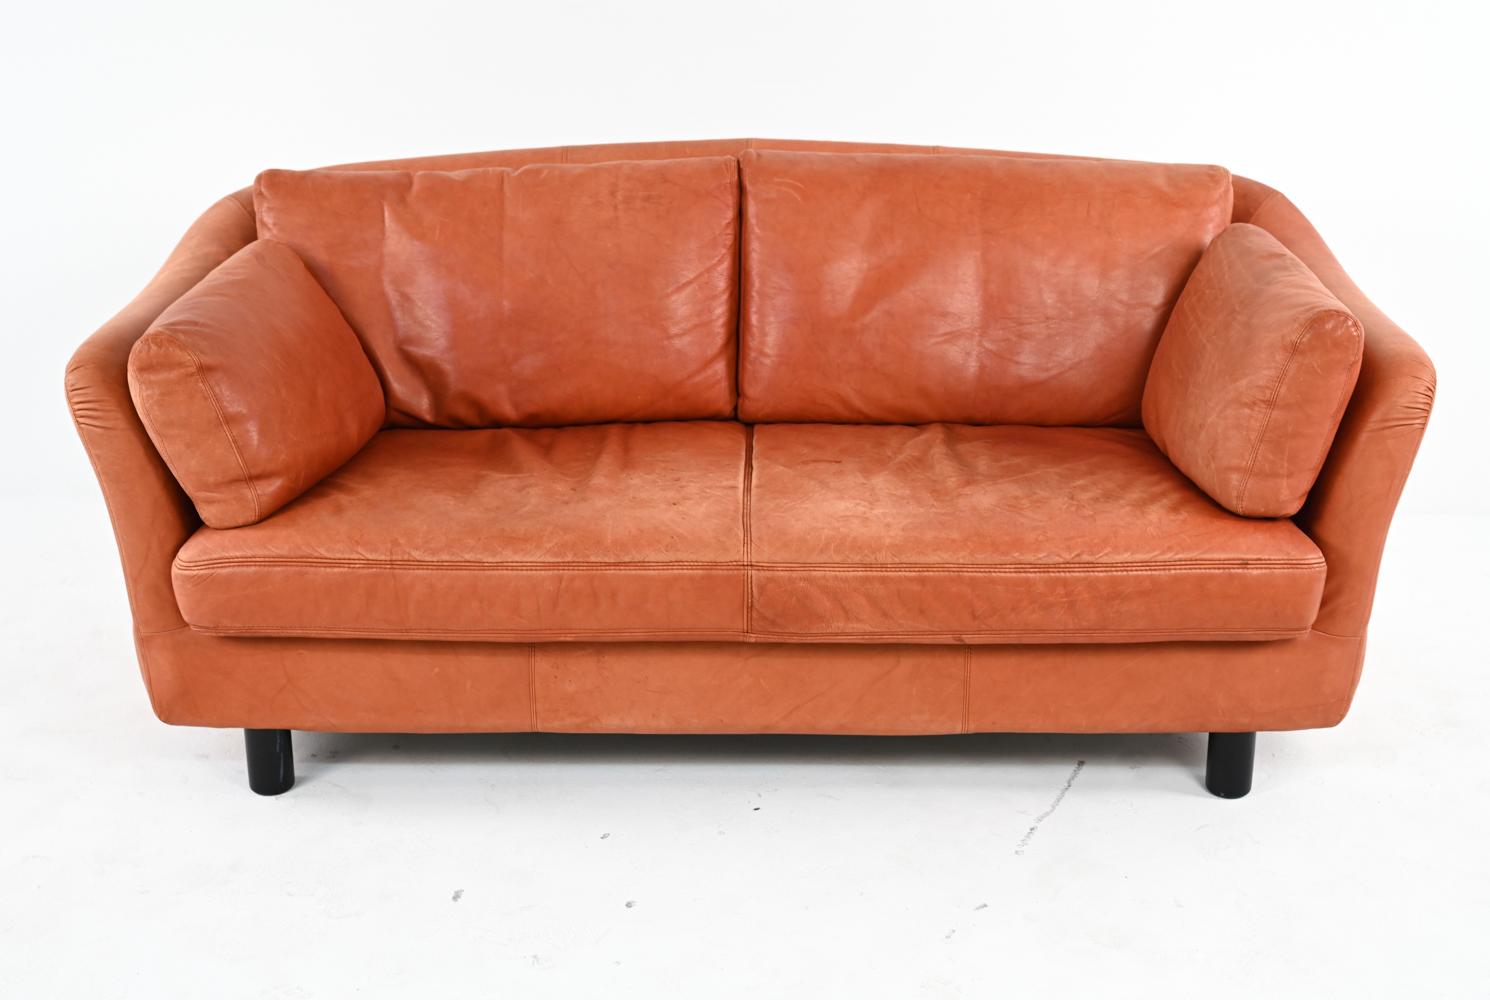 Pair of Swedish Modern Leather Sofas by Dux, c. 1970's 10